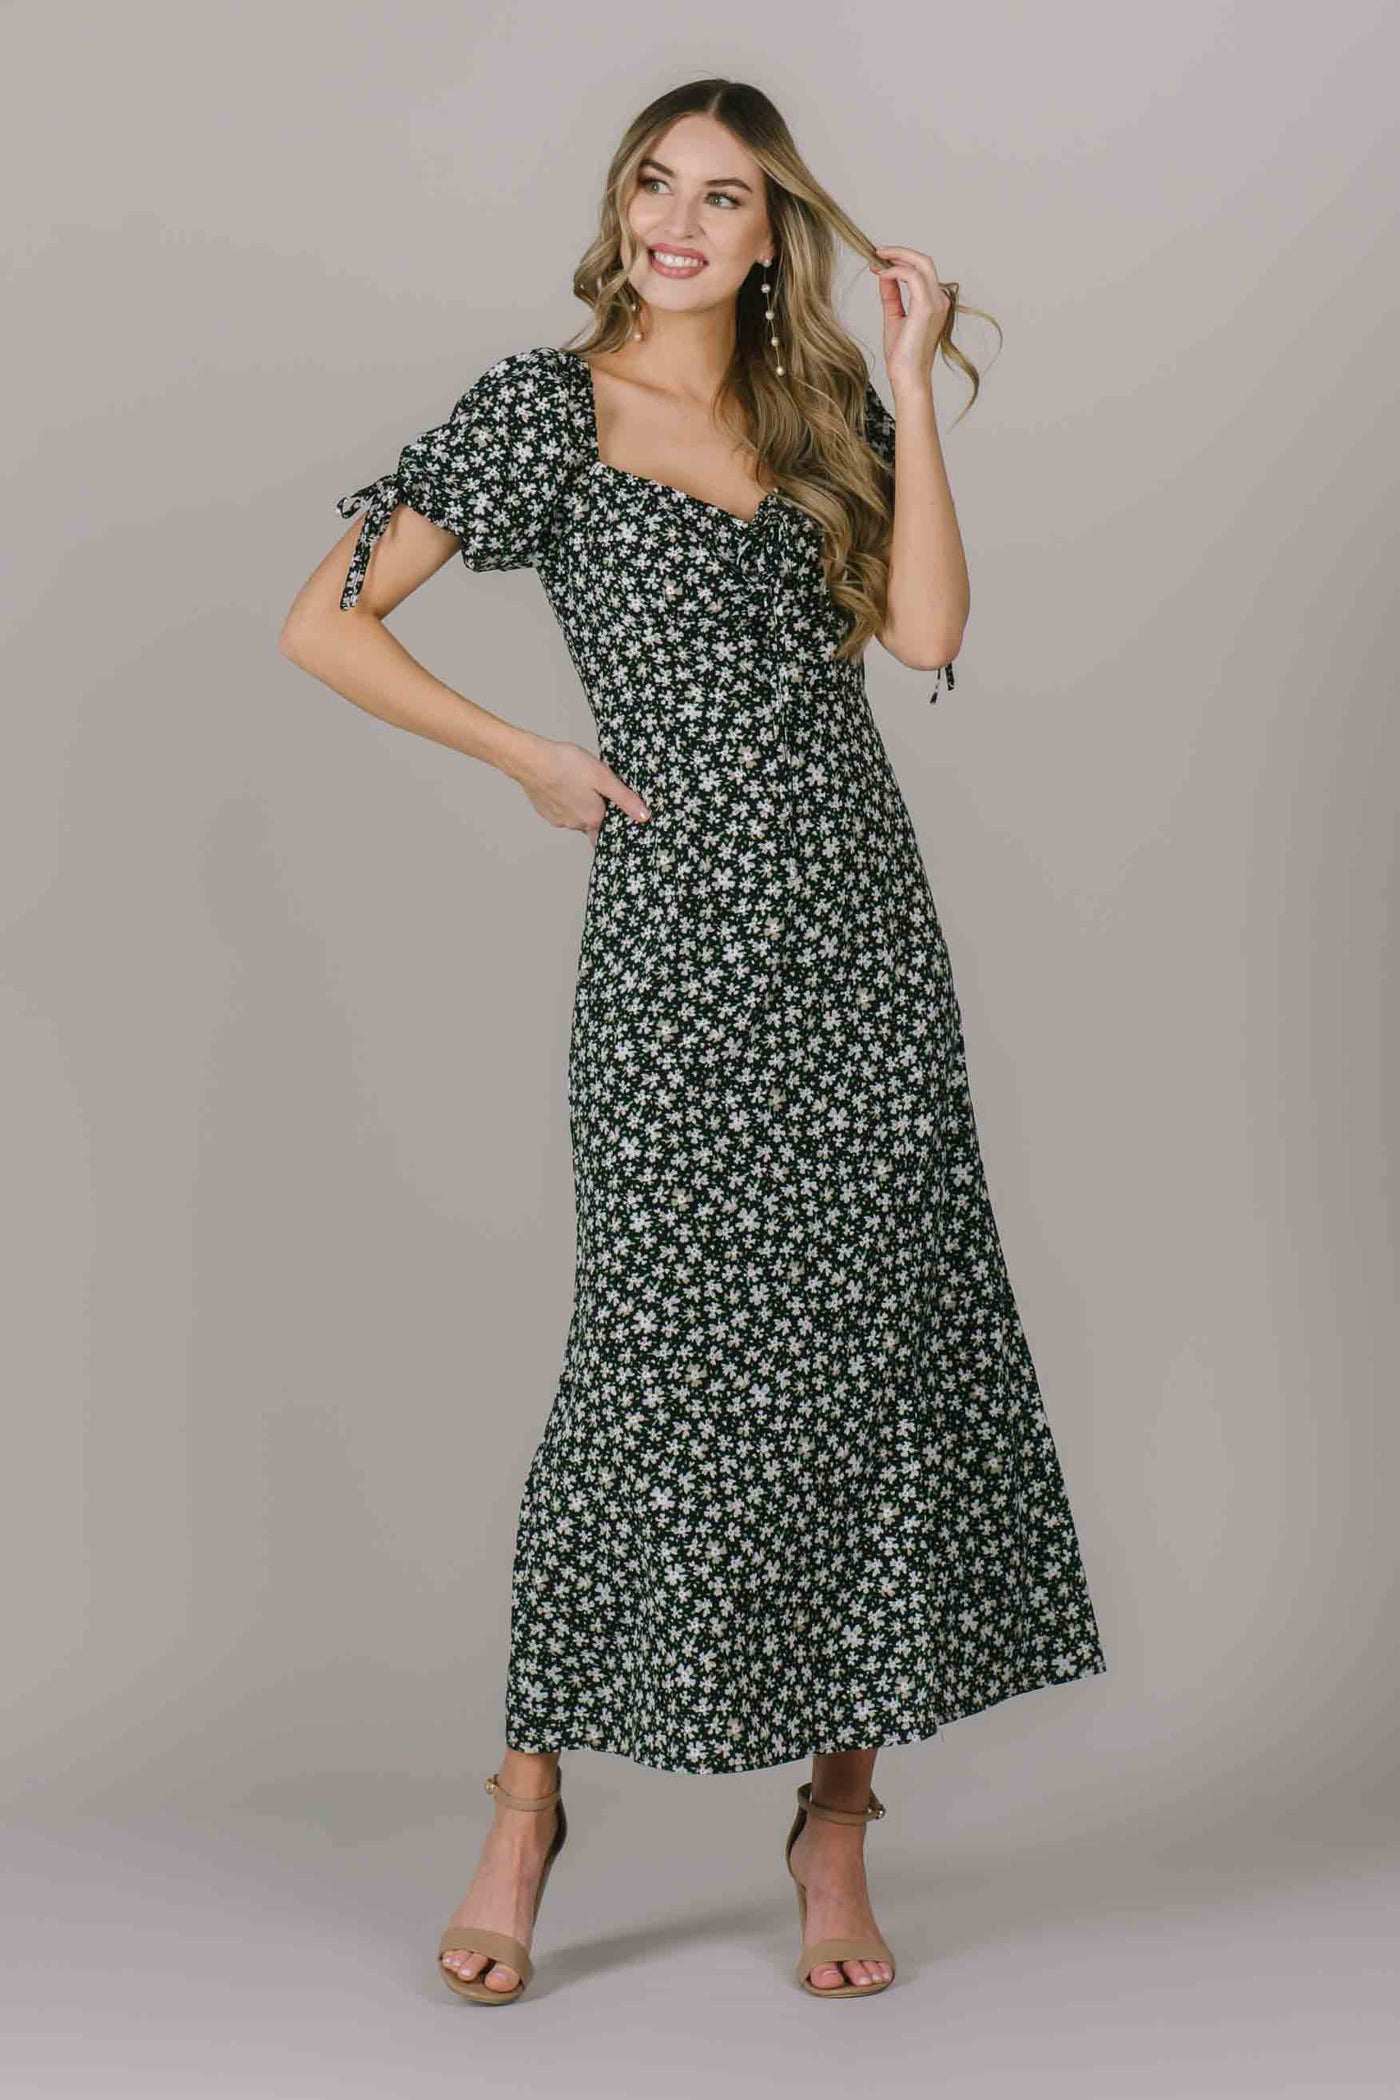 A full length modest dress with a white floral pattern, sweetheart neckline, puff sleeves with a bow and defined waistline.